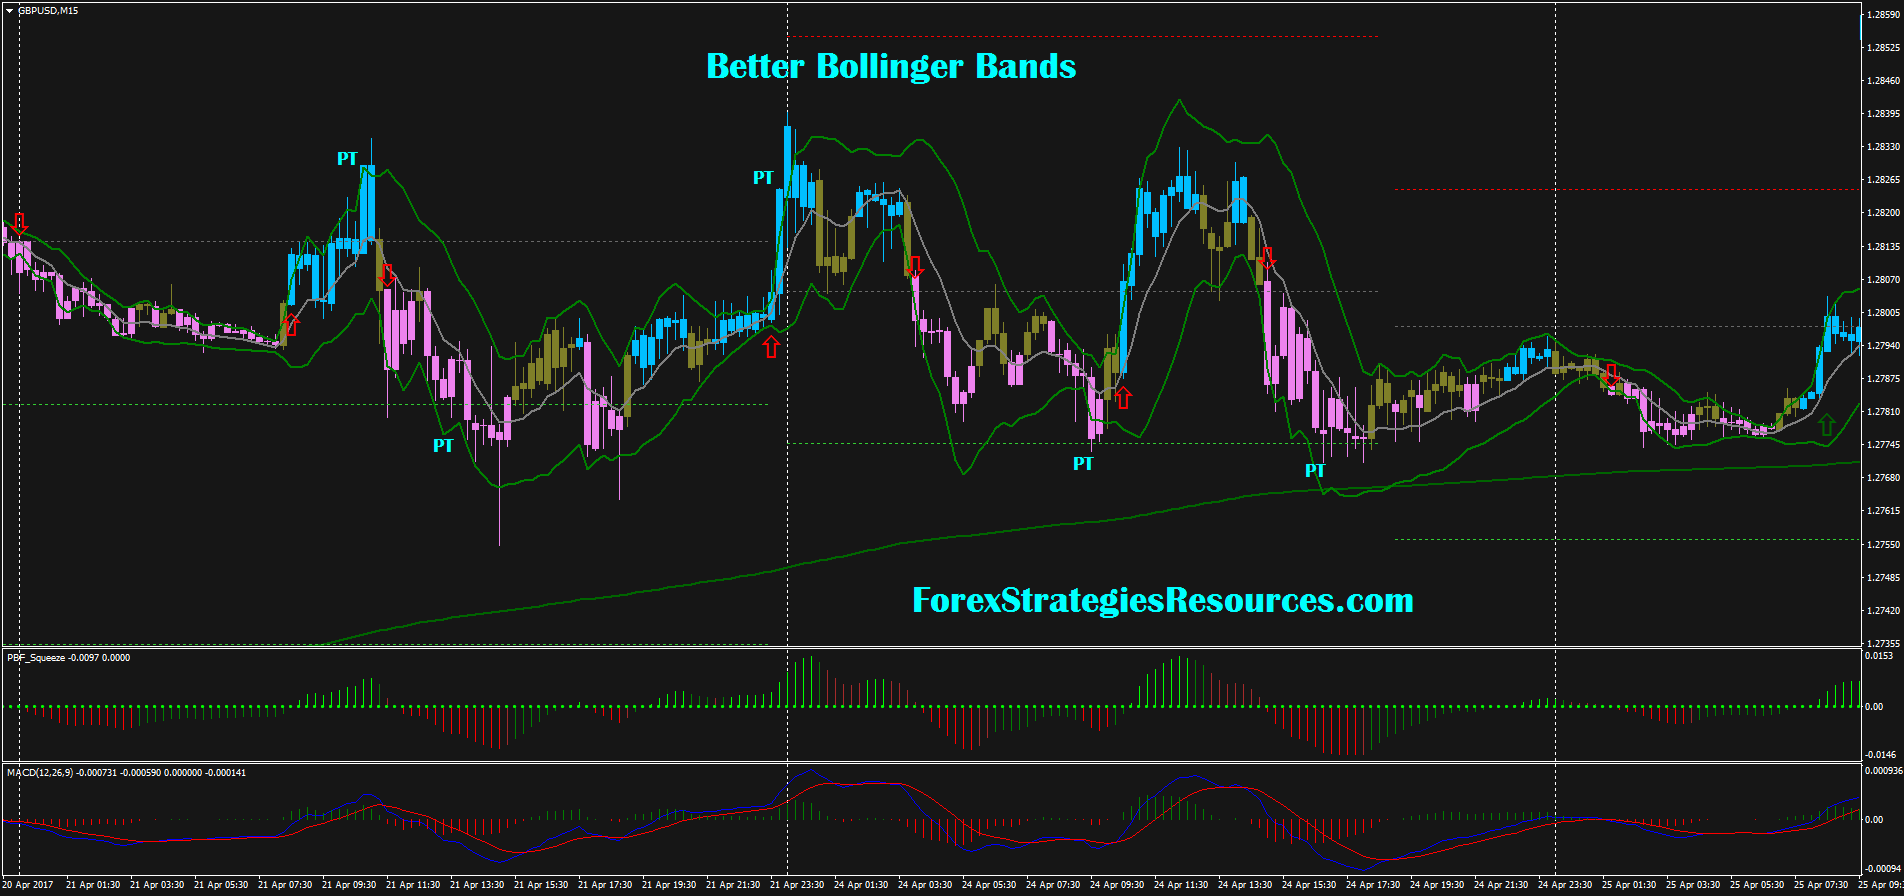 Better Bollinger Bands - Forex Strategies - Forex Resources - Forex Trading-free  forex trading signals and FX Forecast